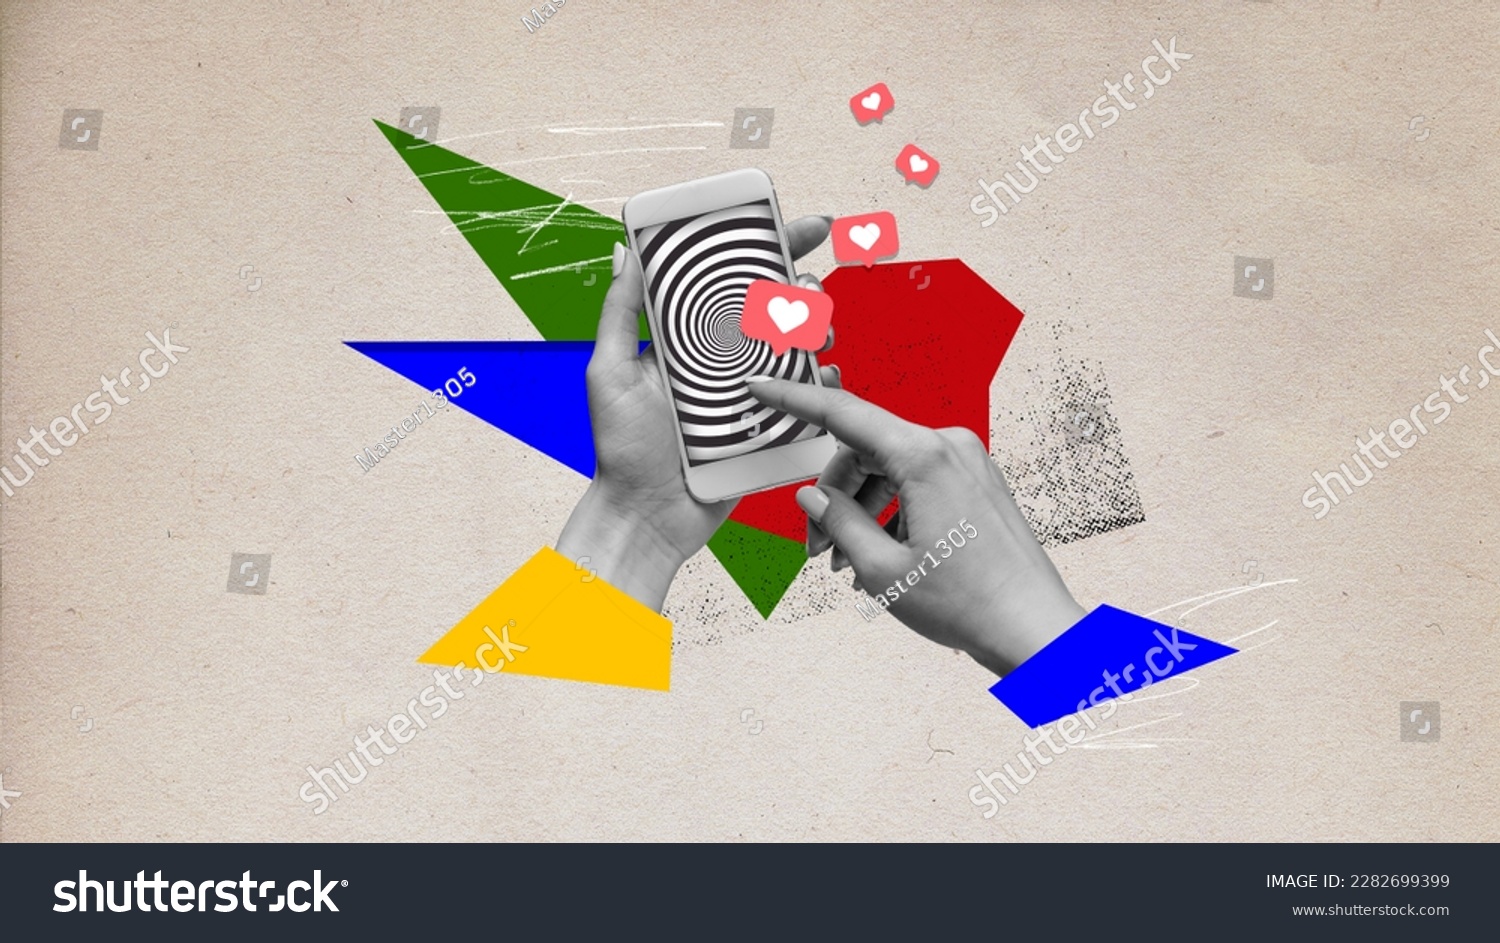 Human hands holding mobile phone with hypnotic screen. Many social media likes. Popularity and internet addiction. Contemporary art collage. Creative design. Concept of modern technologies, surrealism #2282699399